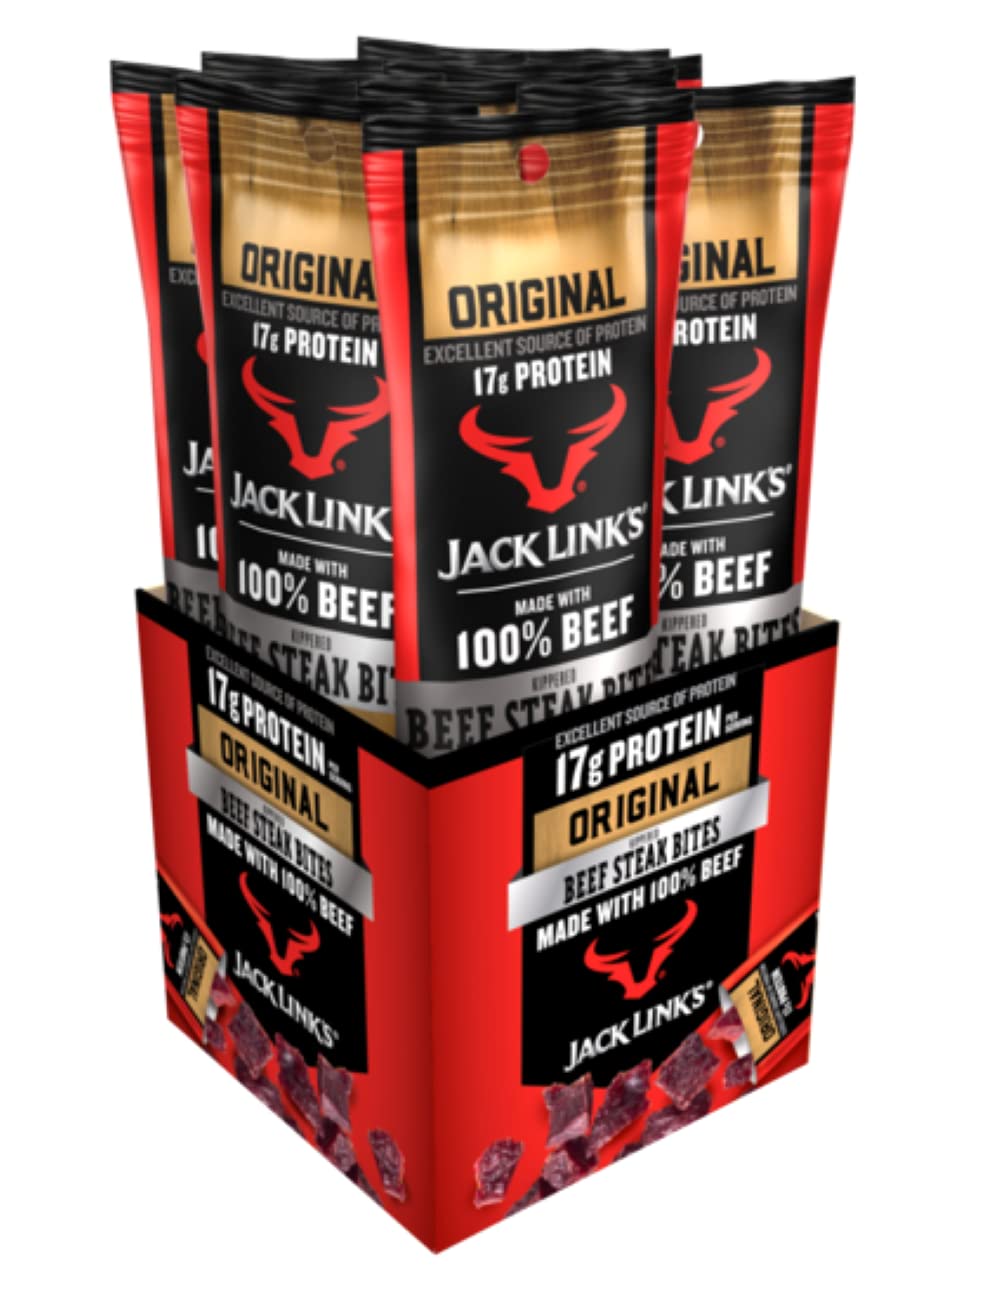 Jack Link\'s Jack Links Beef Steak Jerky Bites Original Flavor On-the-go Poppable Meat Snack 17g of Protein and 100 calories Made with Premiu